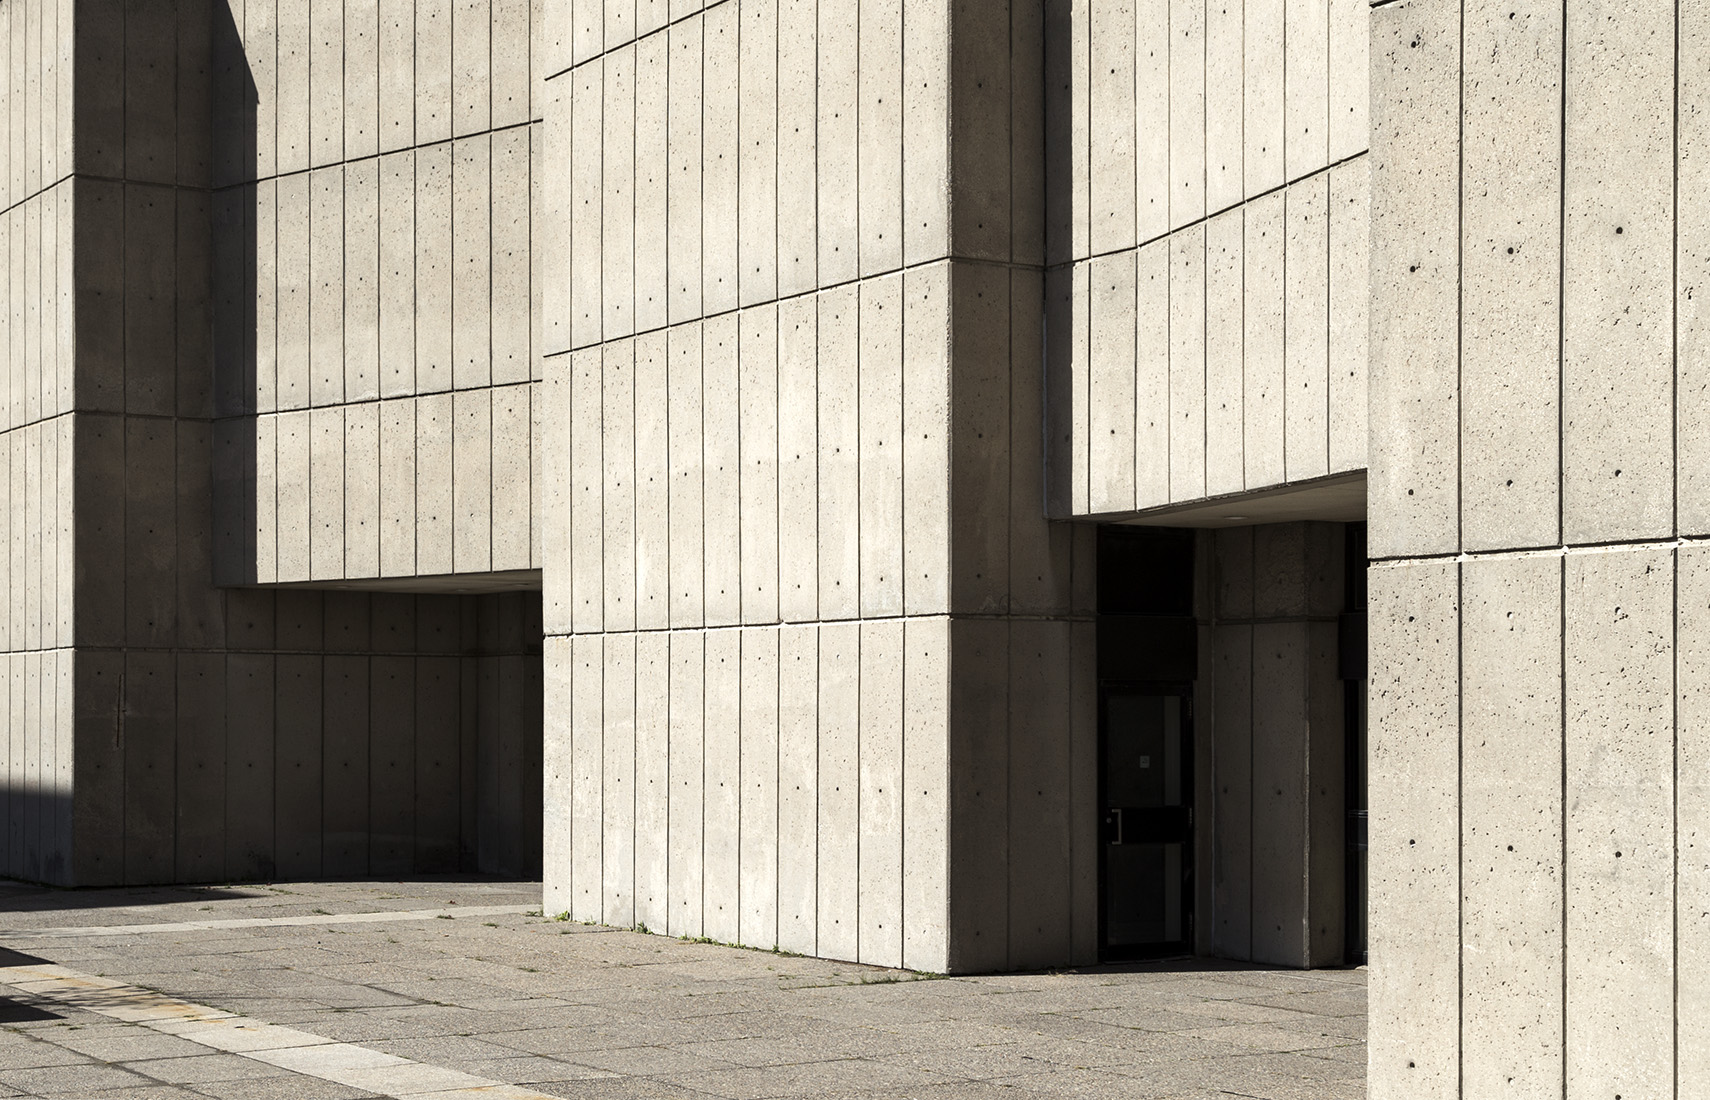 20161009. A study in concrete at York University's Curtis Lectur